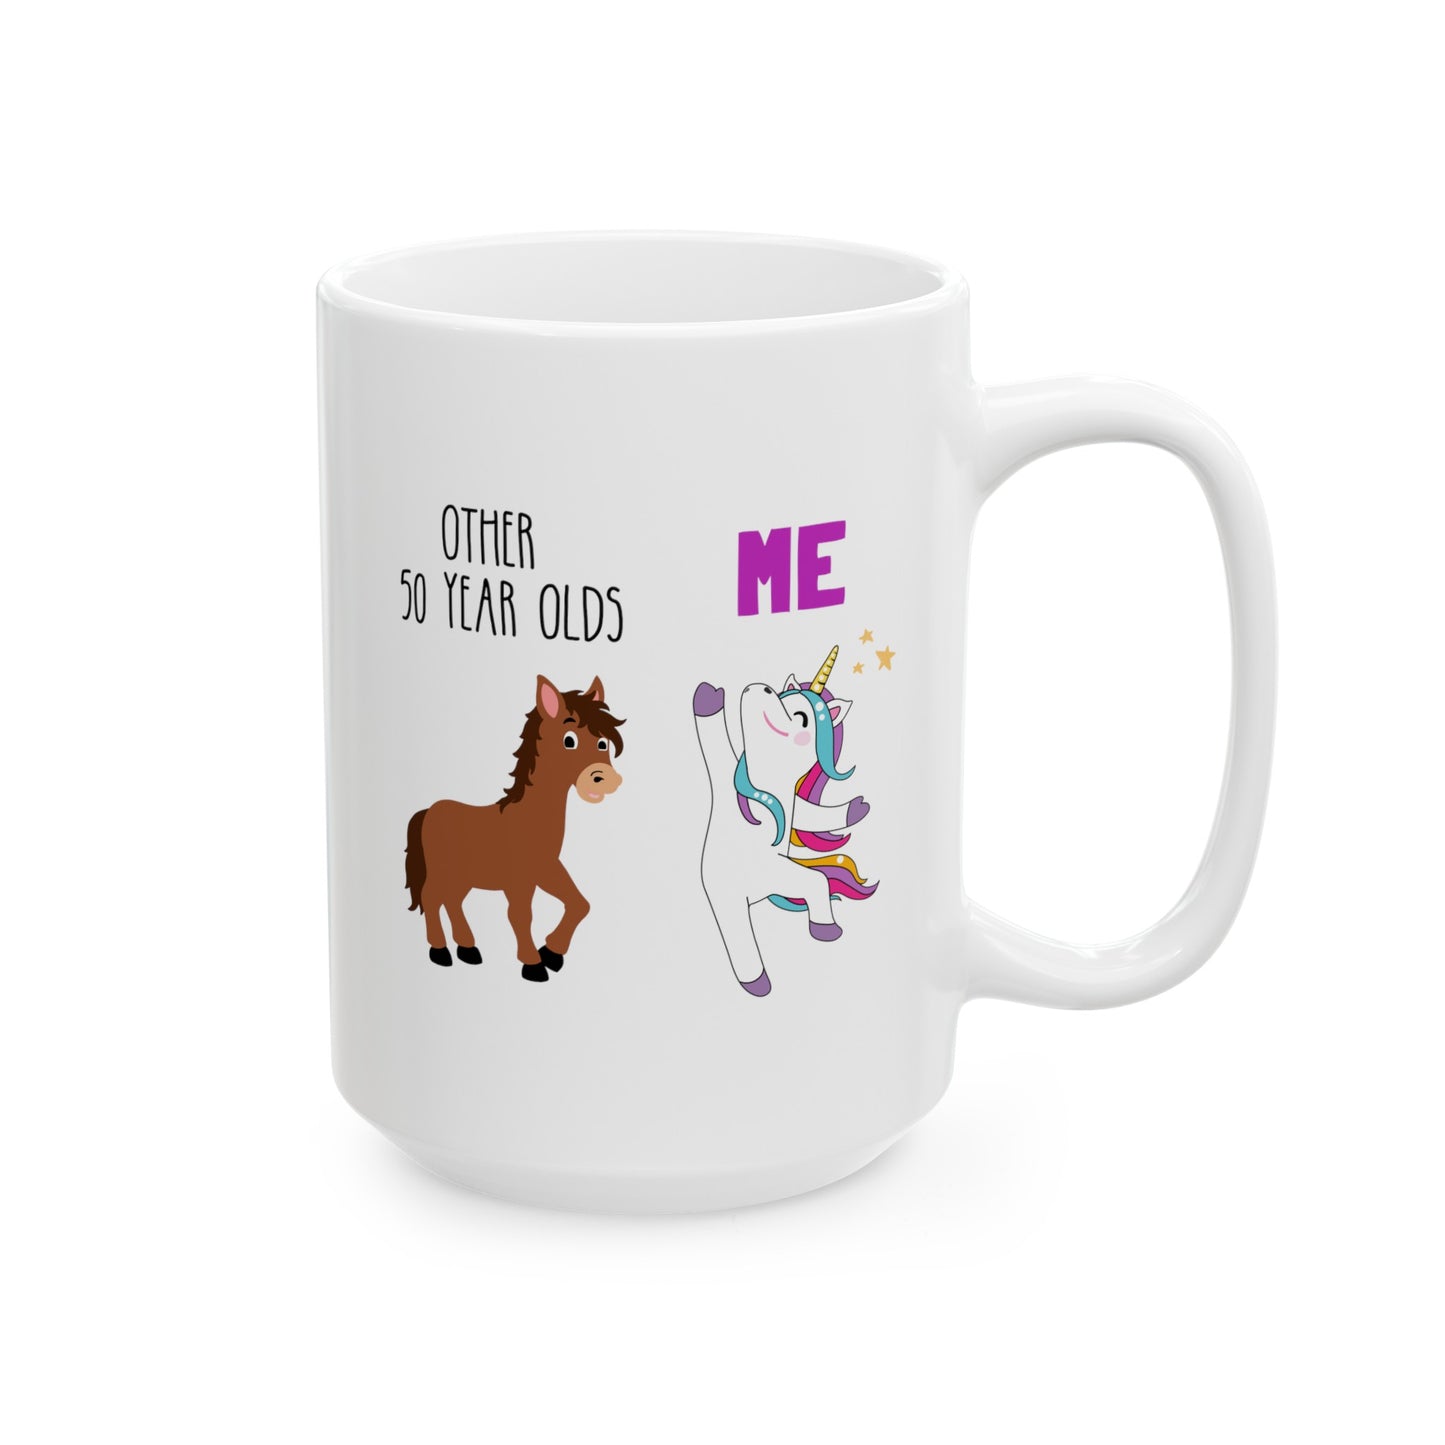 Other 50 Year Olds Vs Me 15oz white funny large coffee mug gift for friend family birthday personalized custom age horse unicorn waveywares wavey wares wavywares wavy wares